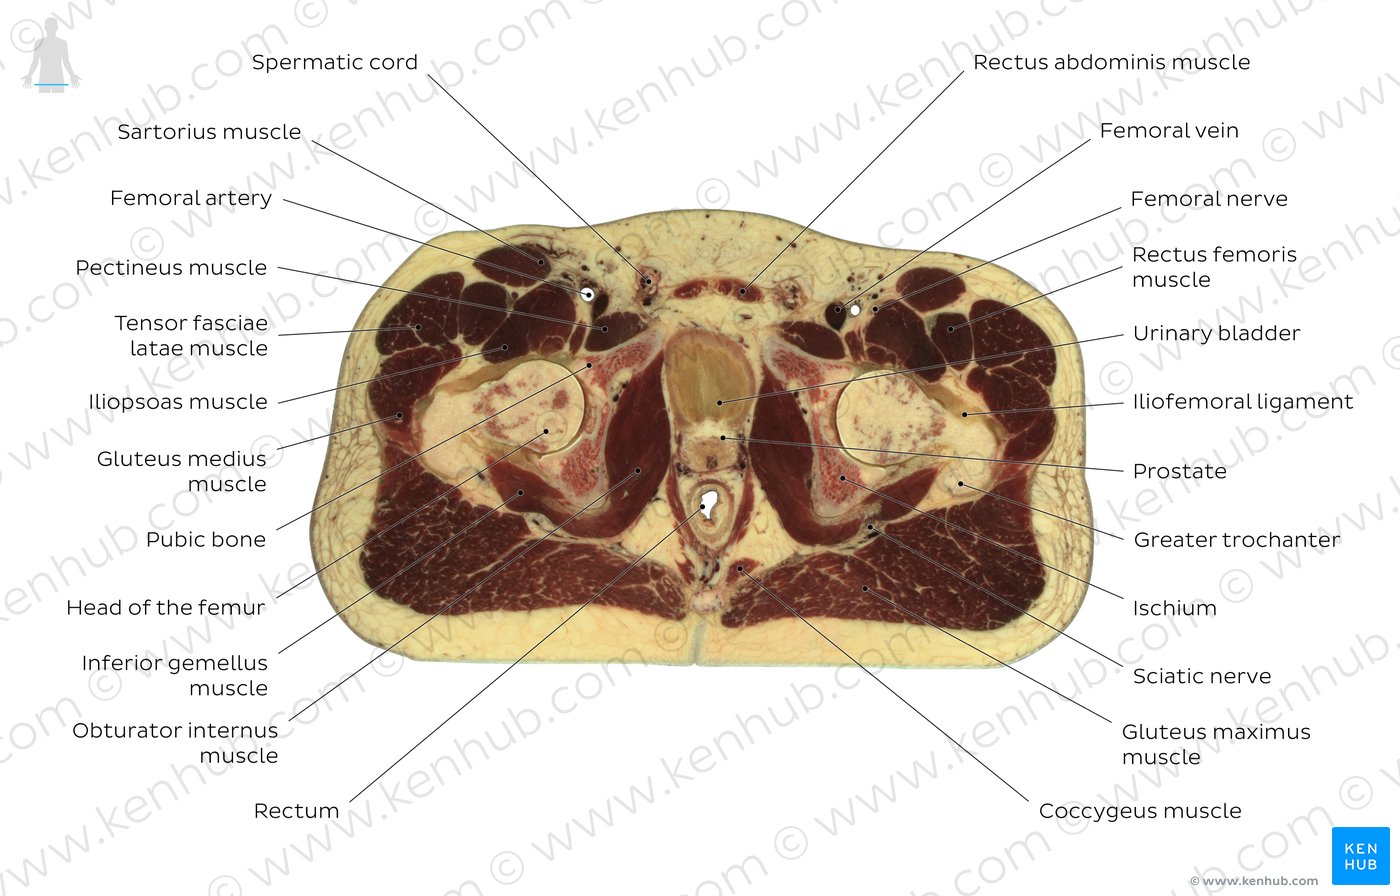 Cross section of the male pelvis through distal end of coccyx: Diagram